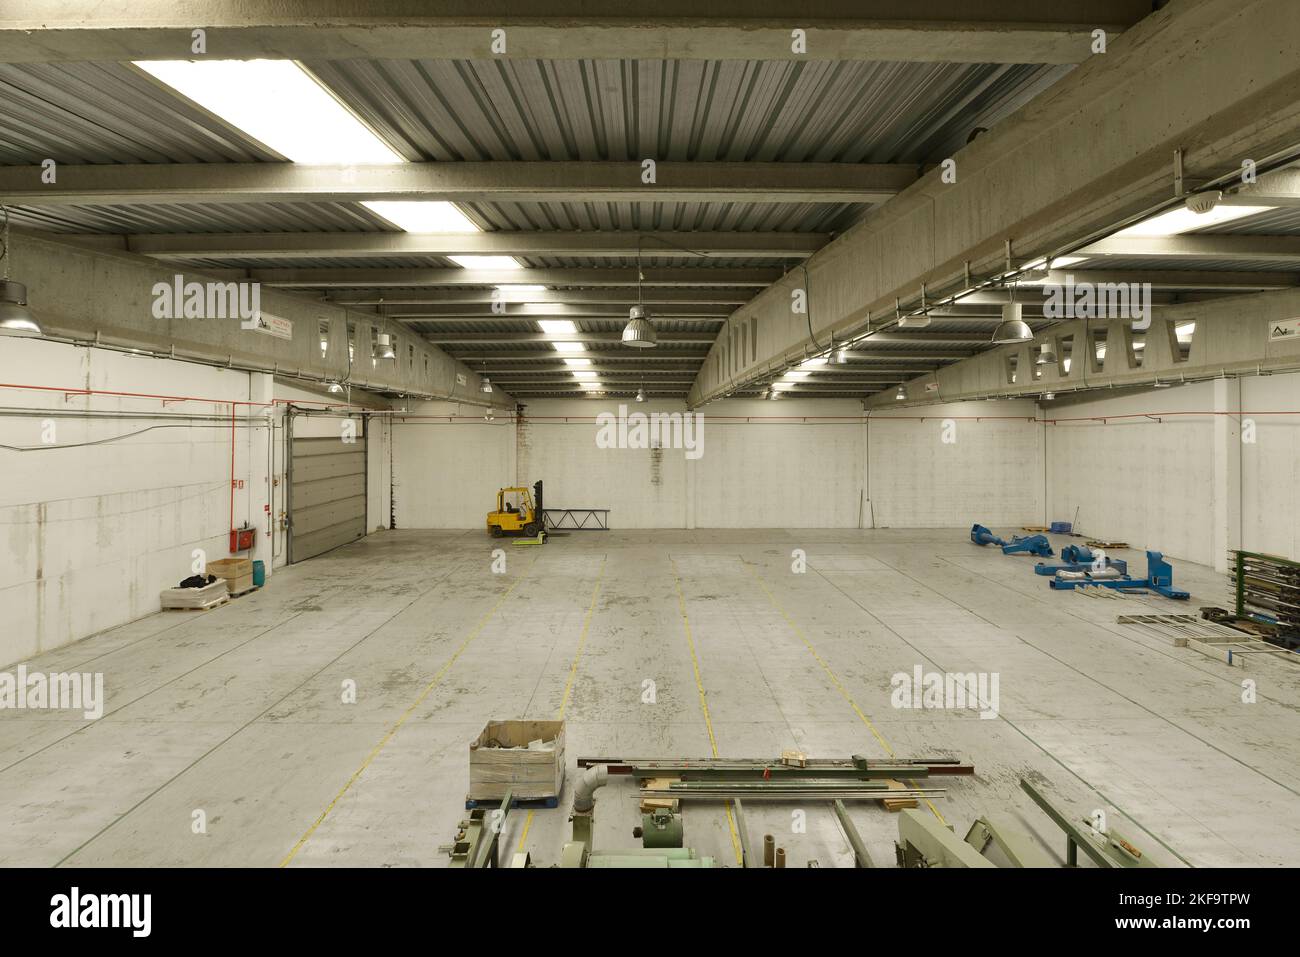 A large empty industrial warehouse with concrete floors and skylights on the roofs Stock Photo